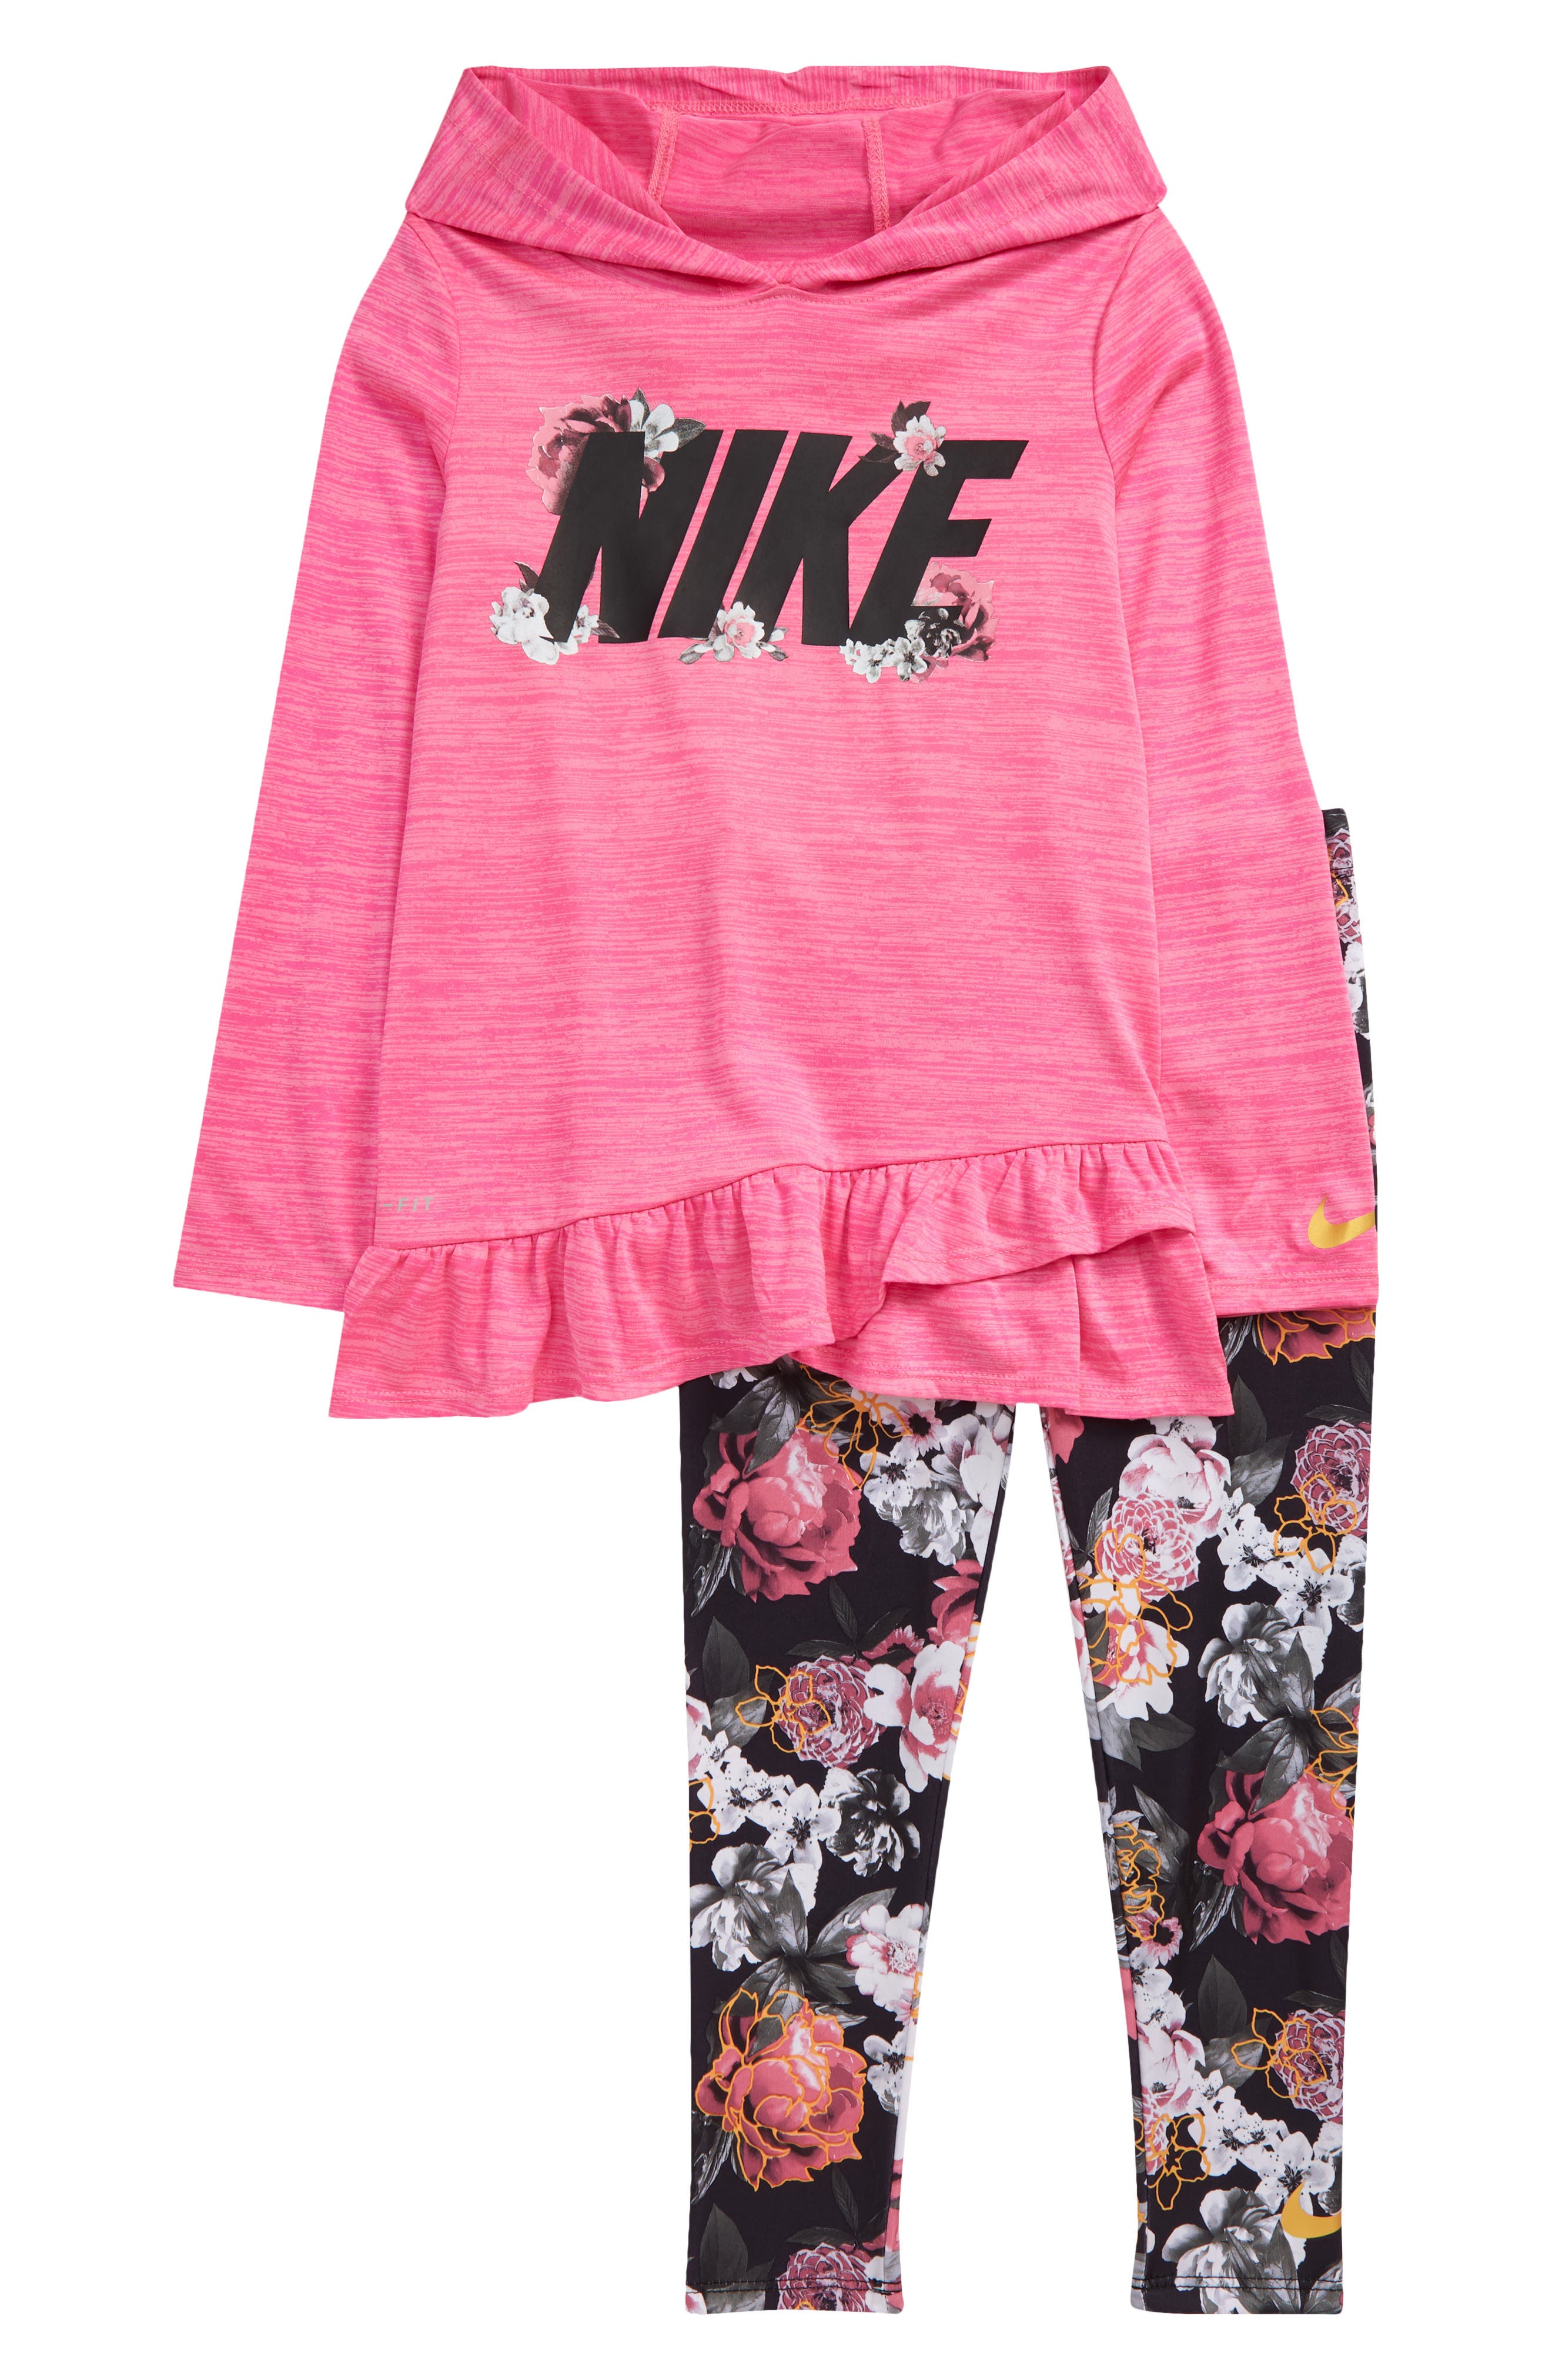 Girls' Nike Clothing and Accessories 